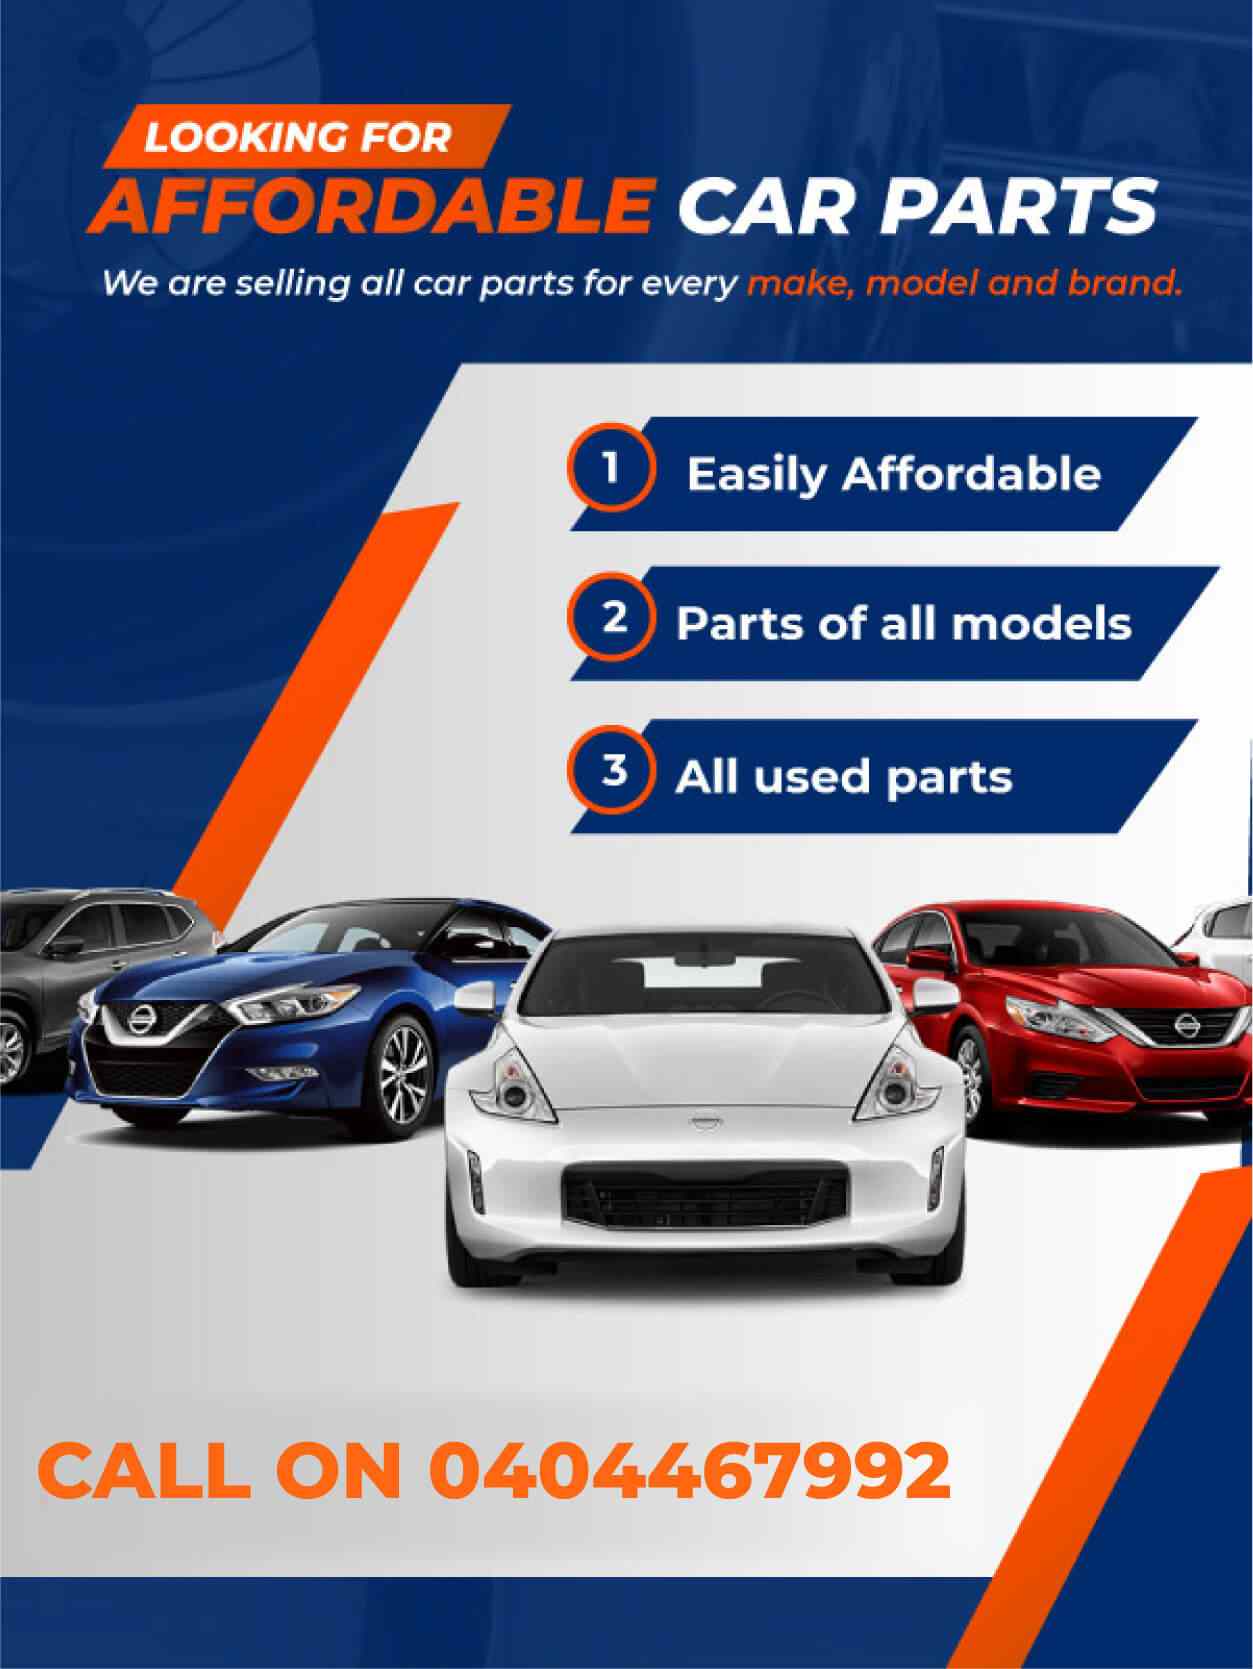 Get ultimate cash for your car. Junk car removal services.